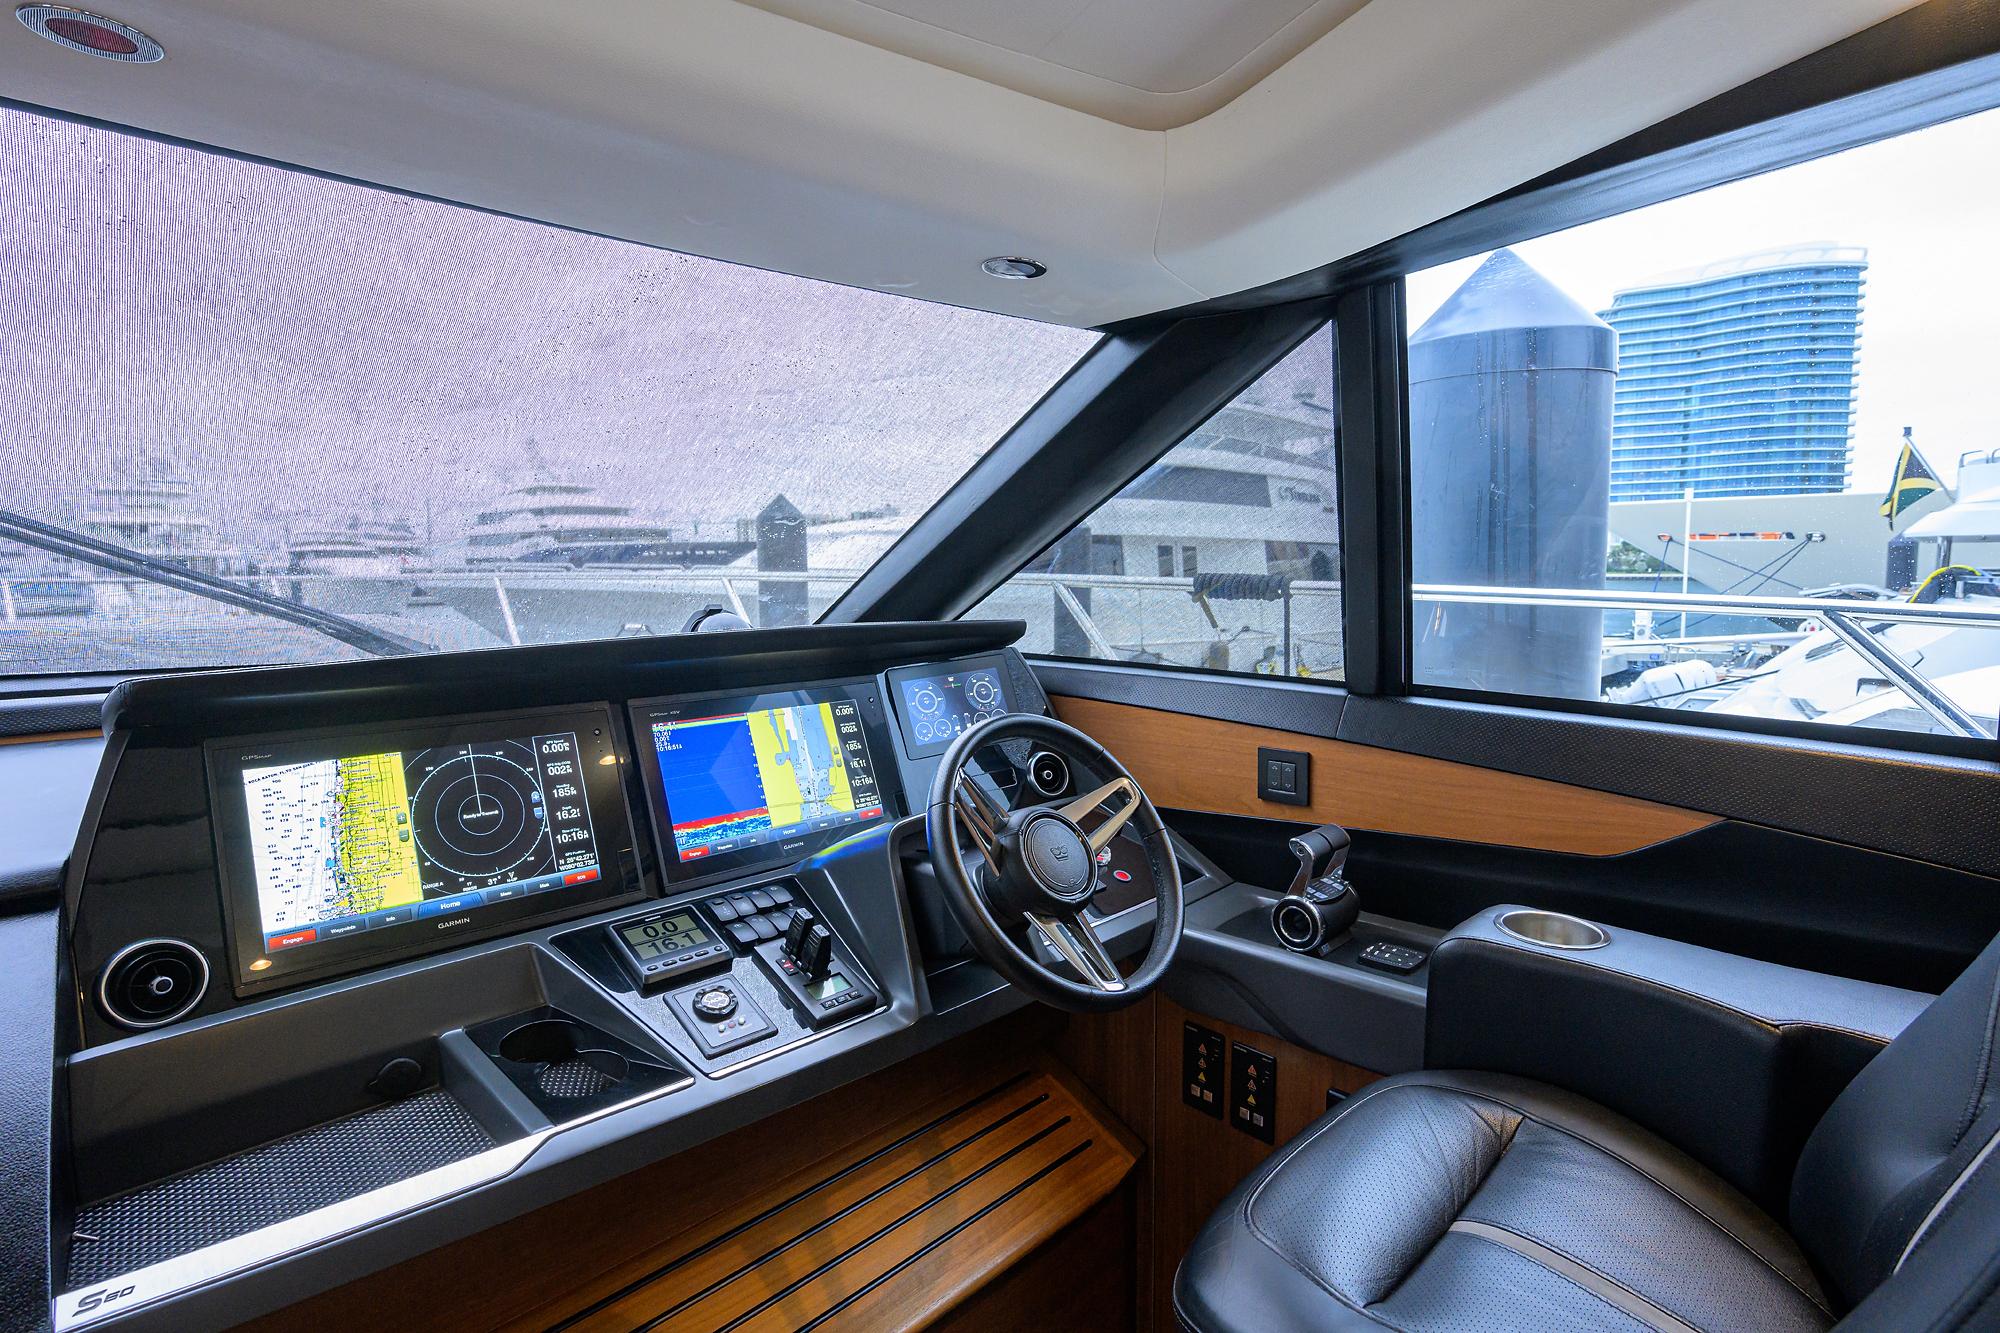 Princess S60 RockOn - Lower Helm, Seating and Electronics